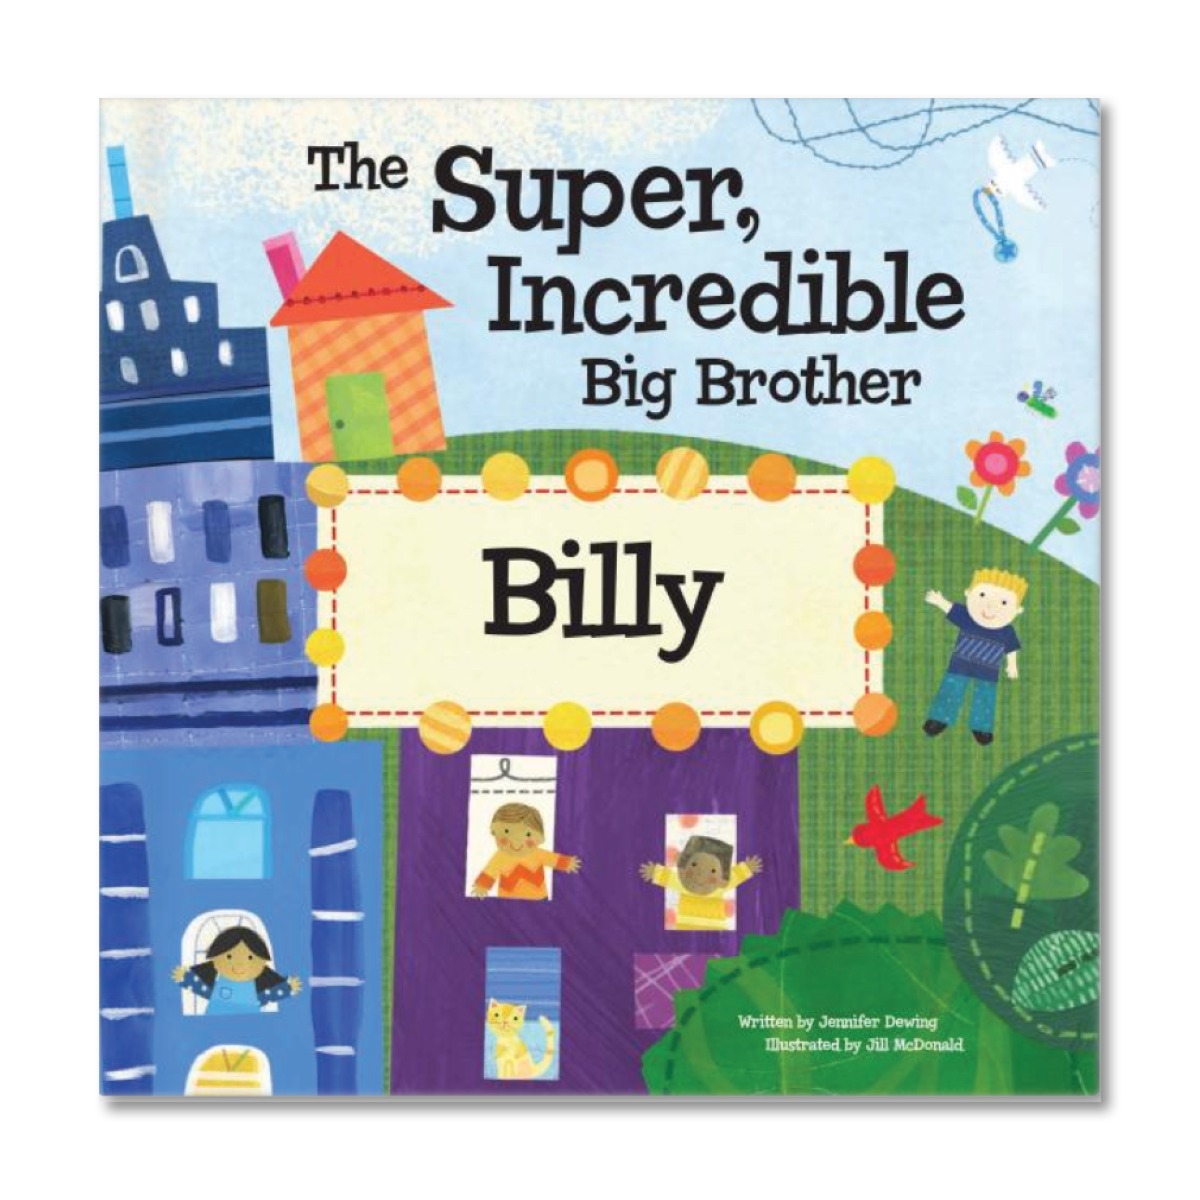 The Super, Incredible Big Brother of Twins Personalized Book and Medal